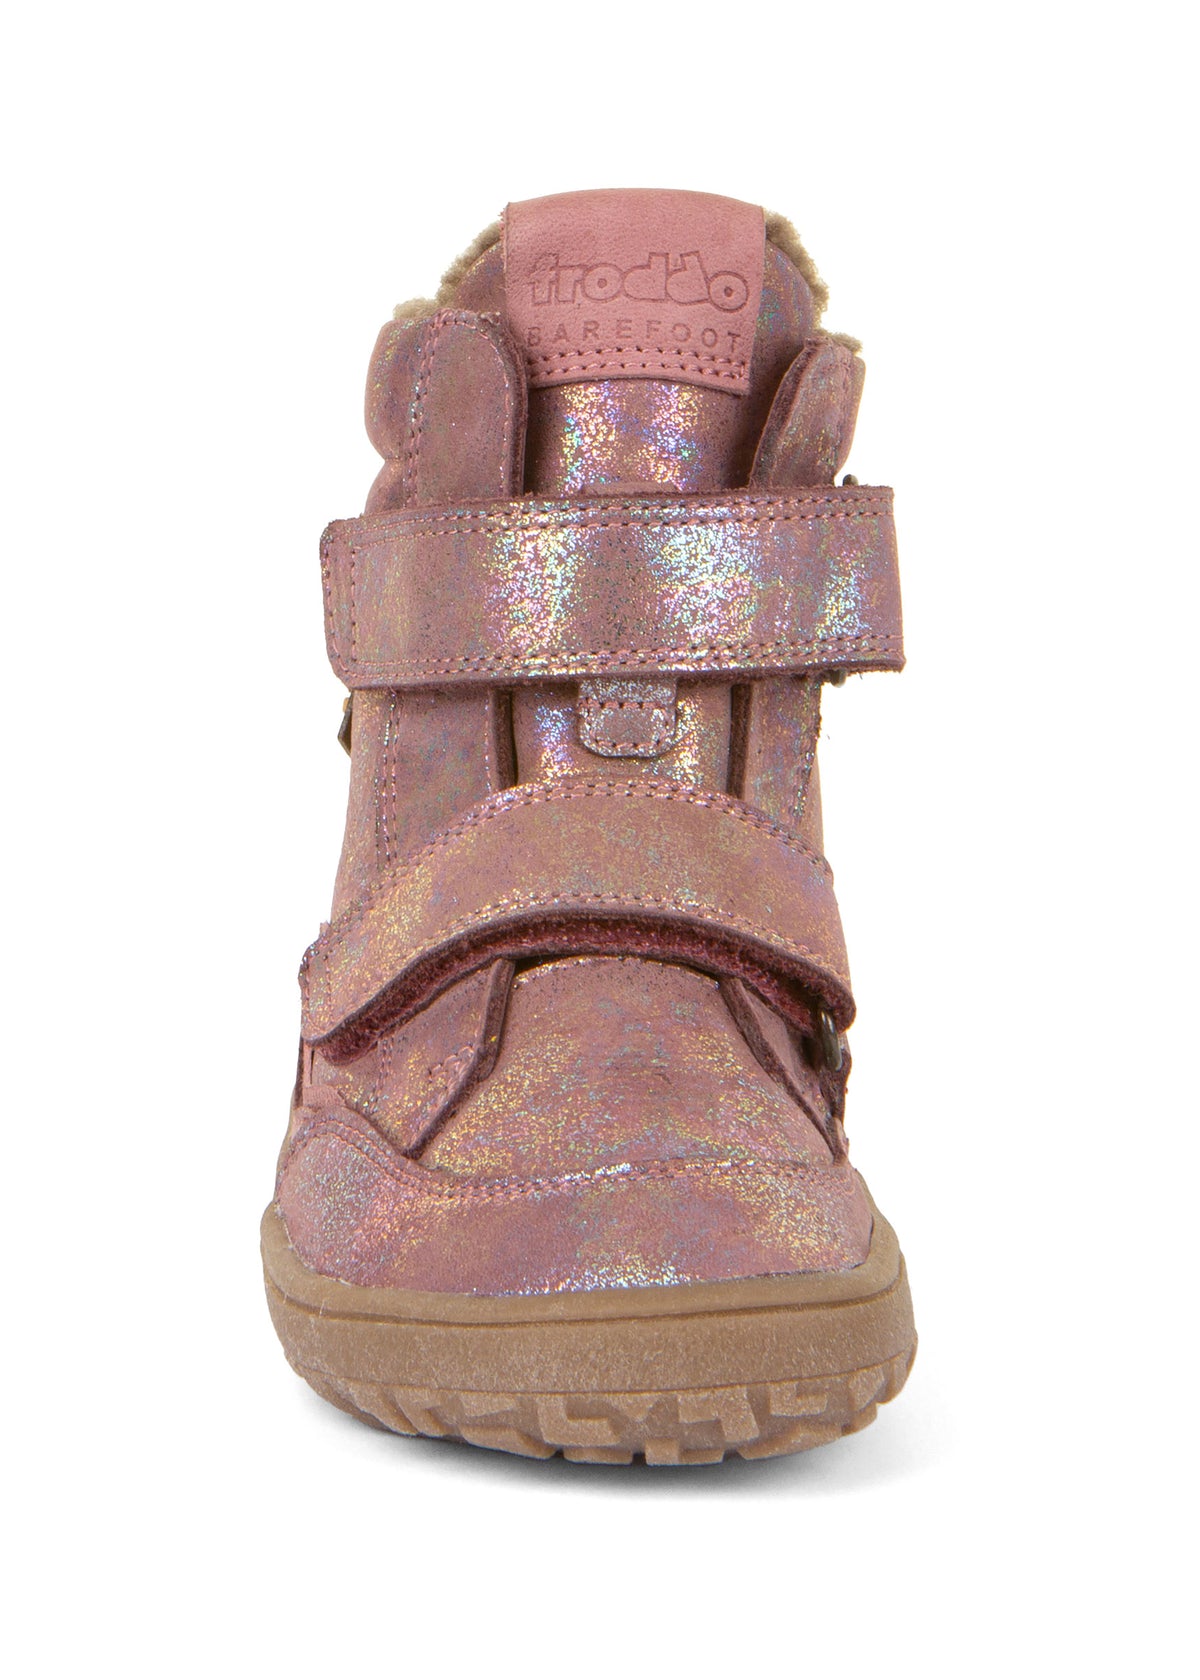 Children's barefoot shoes - leather winter shoes, TEX Winter - sparkling pink